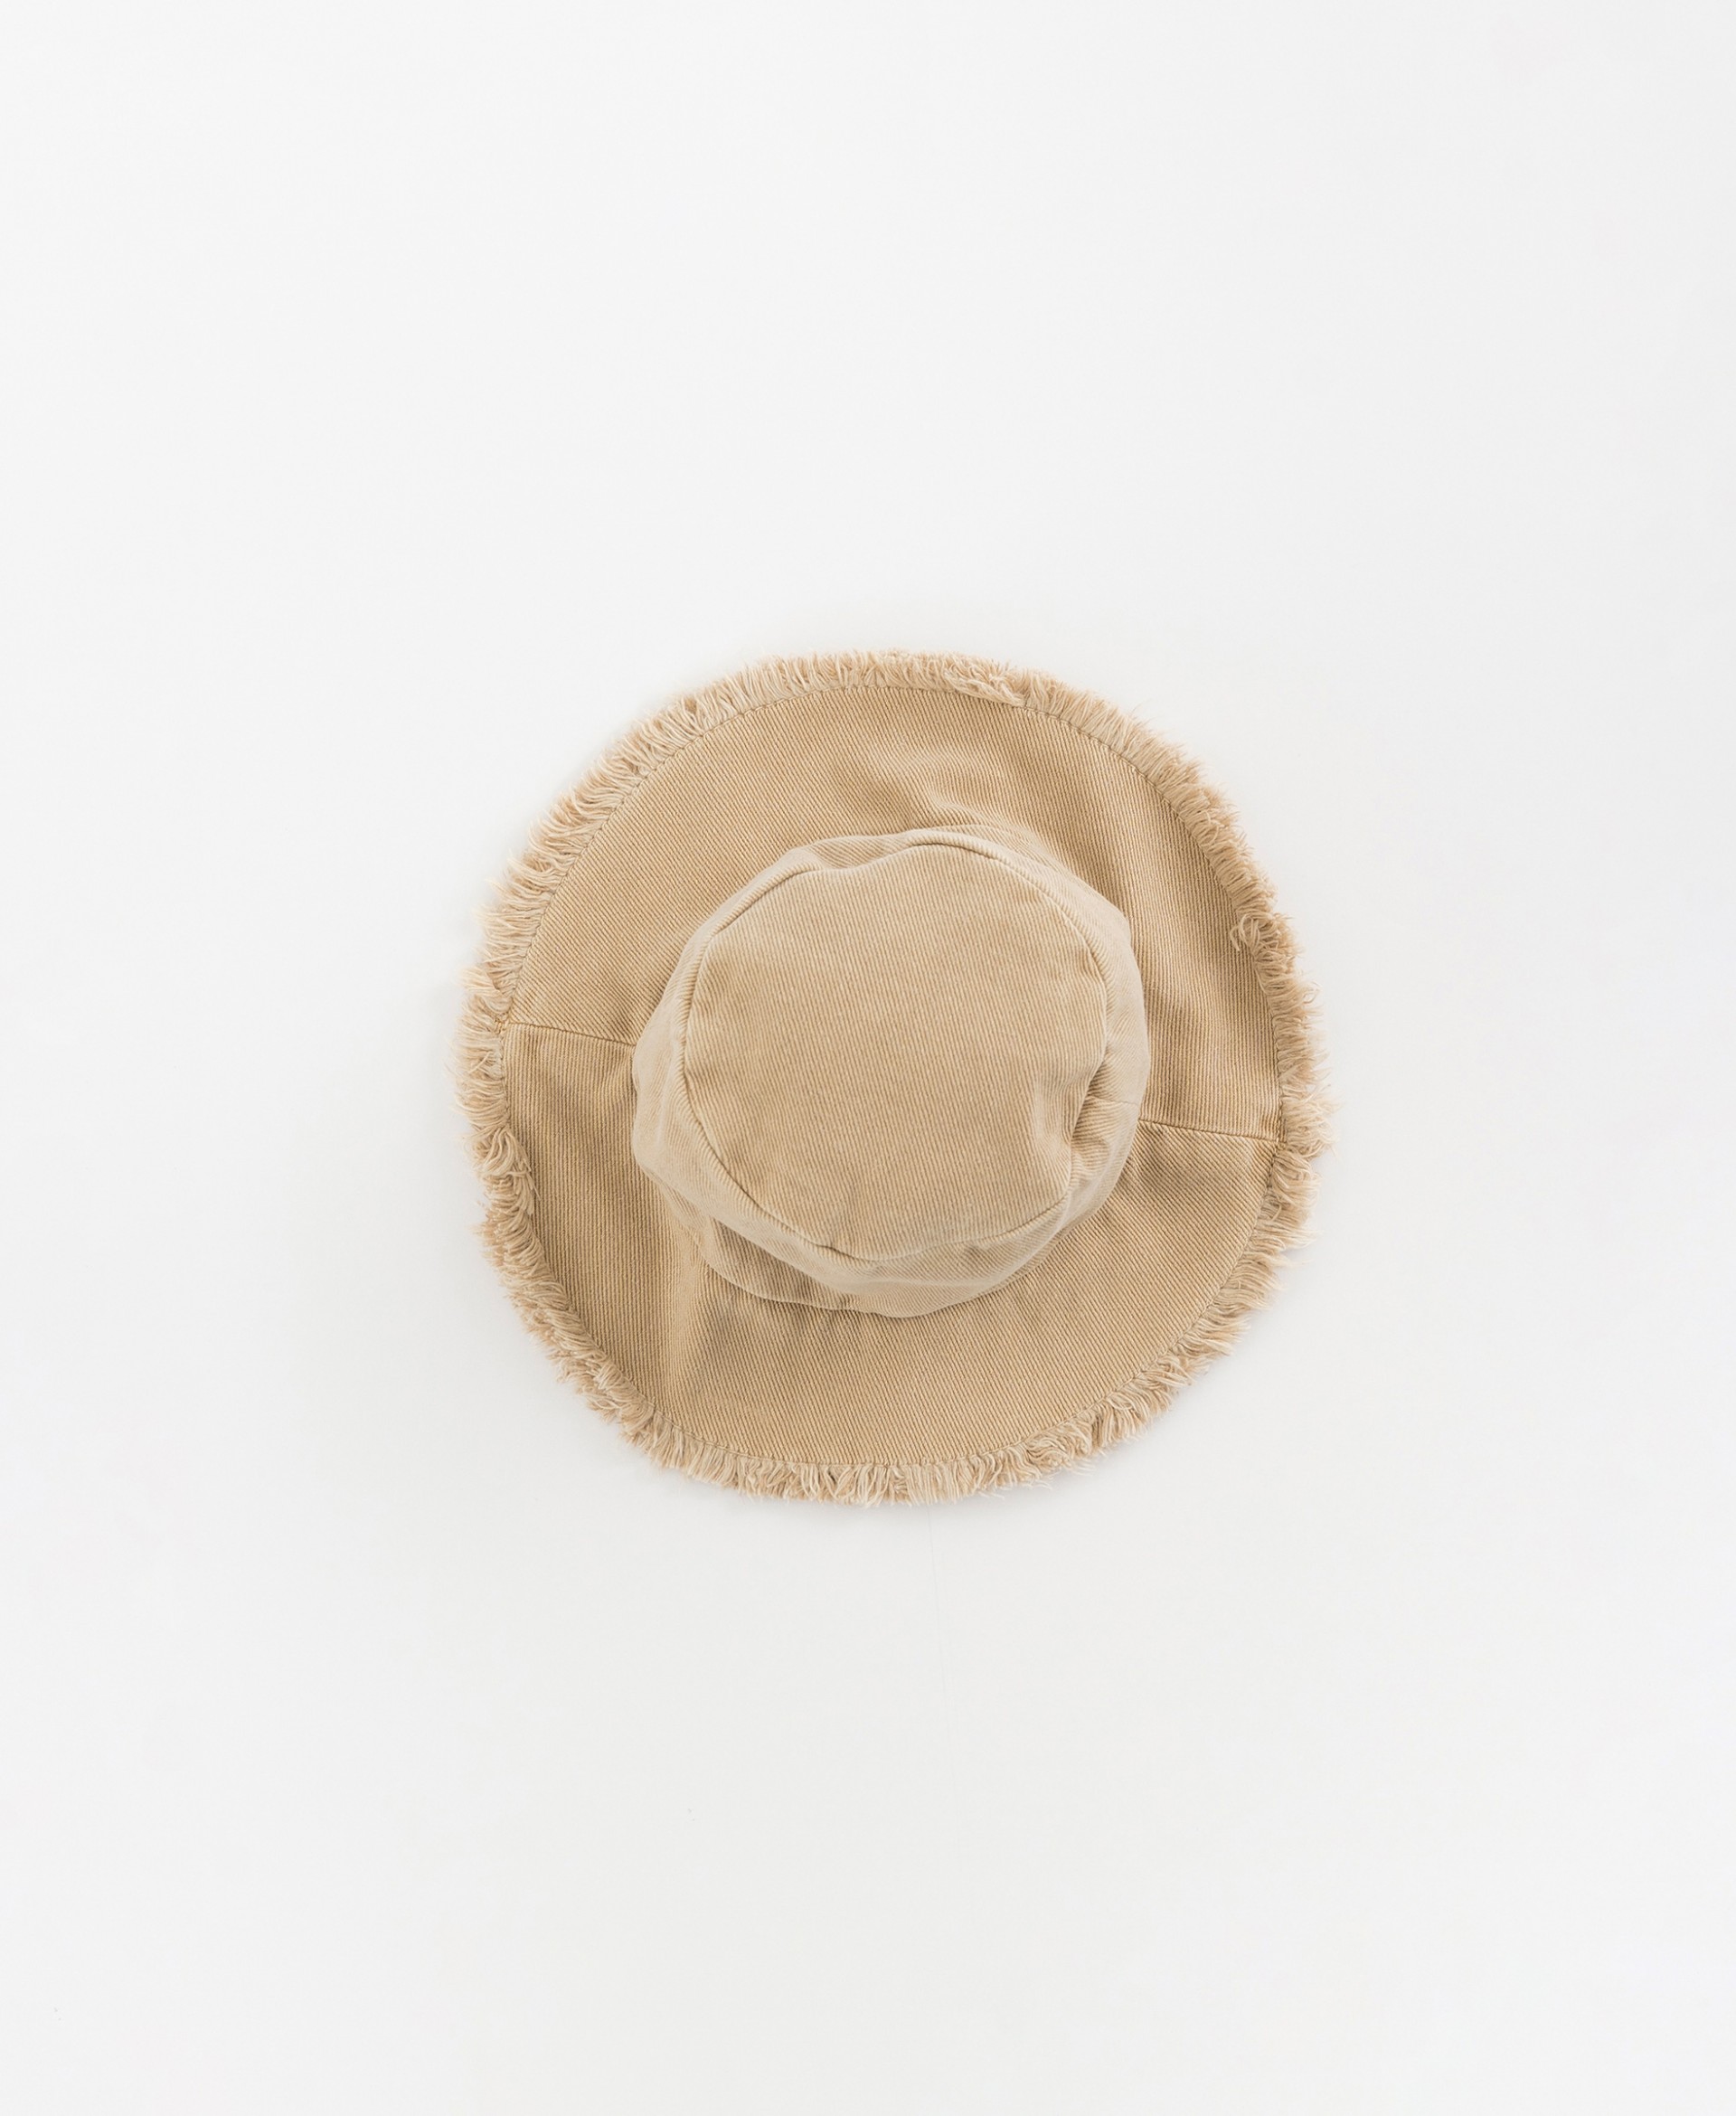 Hat with frayed detail on the brim | Organic Care